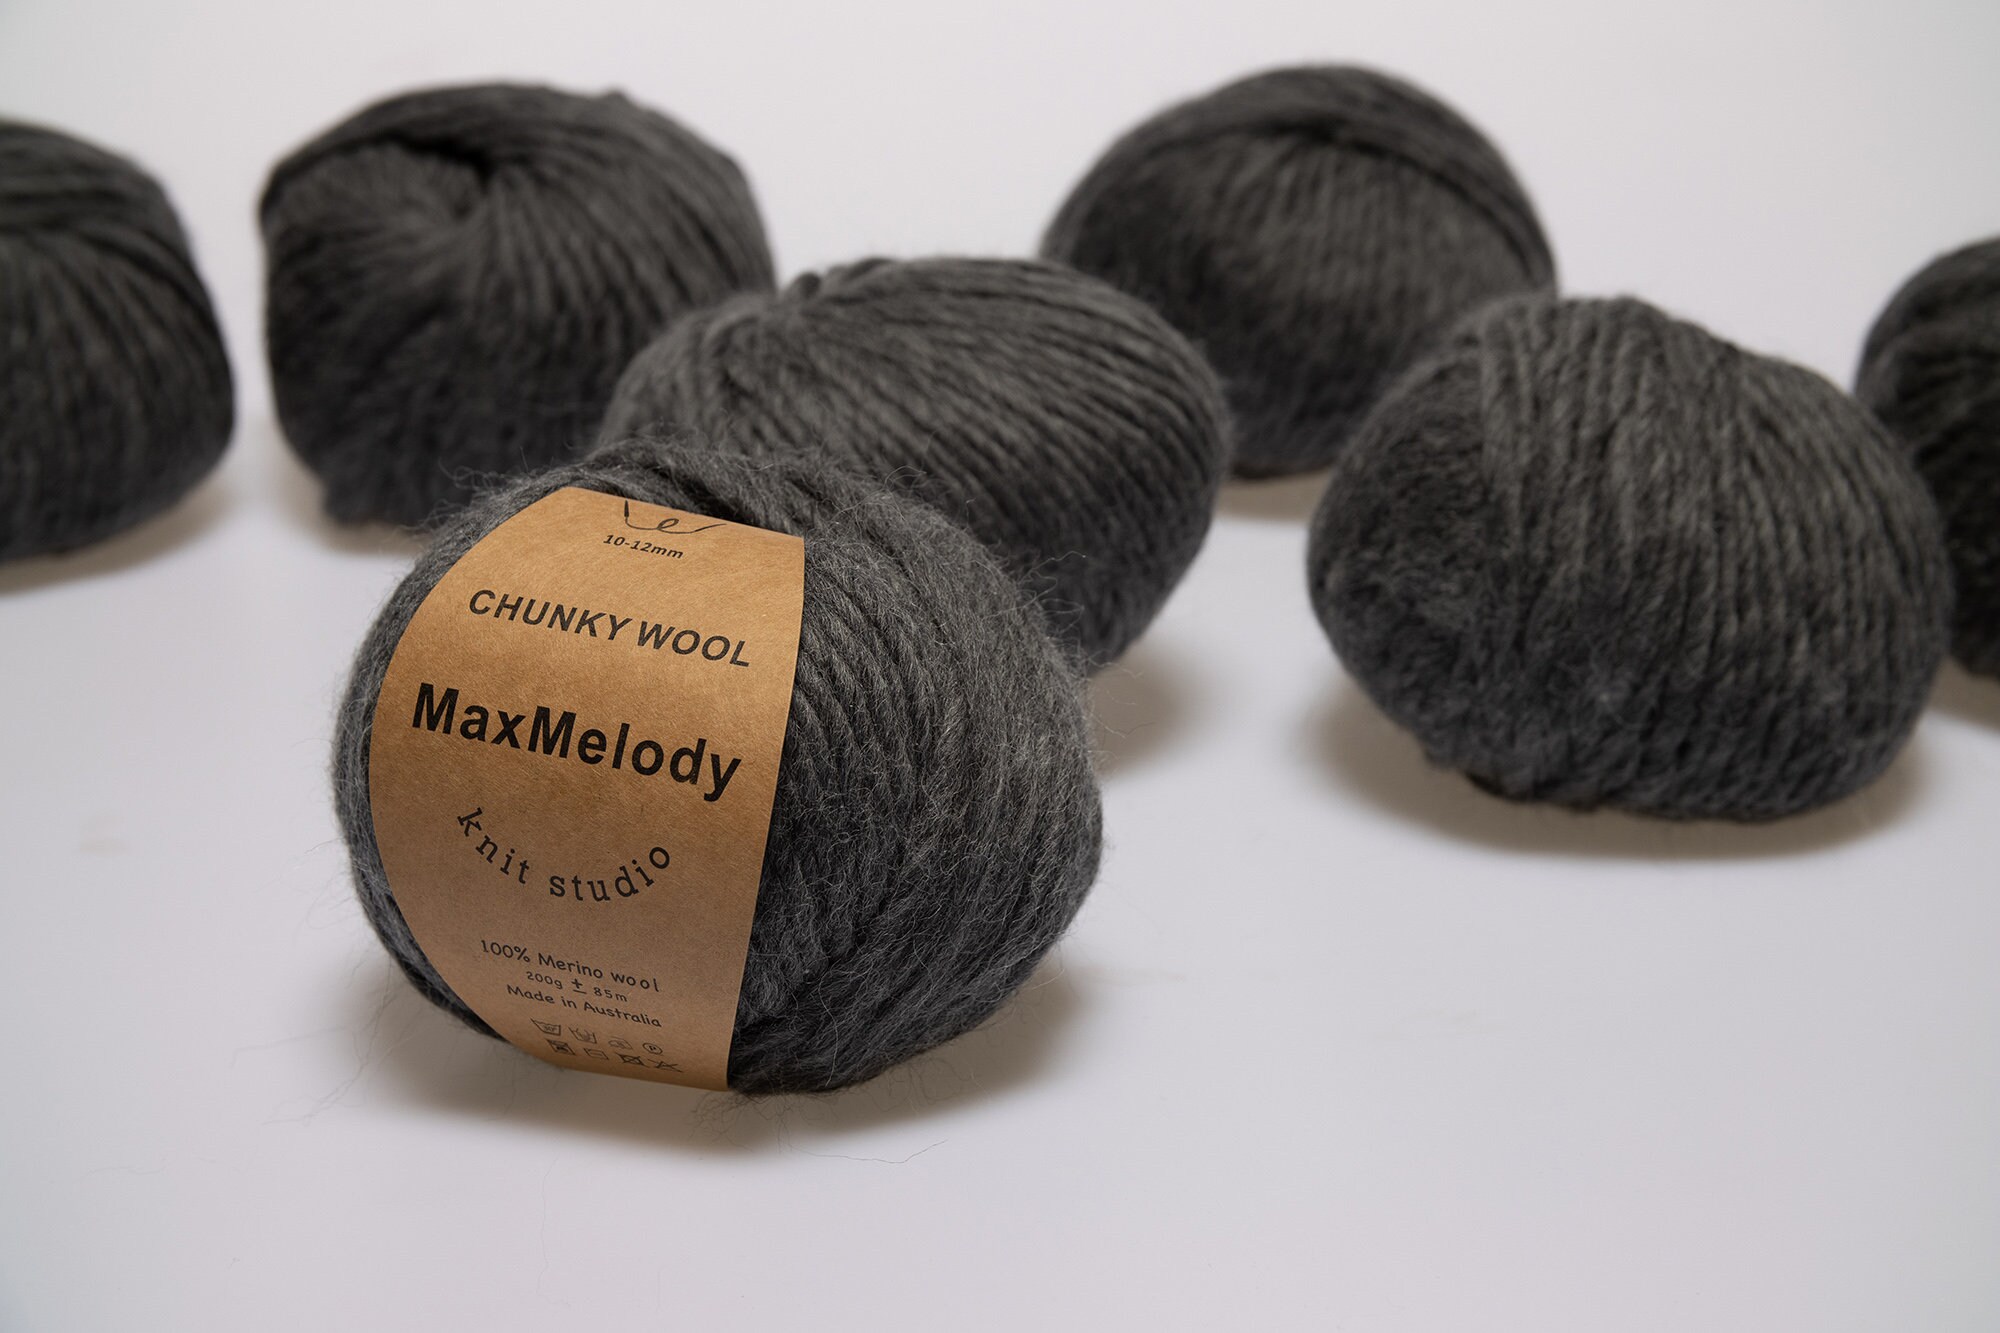 I Love This Chunky HEATHERED CHARCOAL #5 Bulky Weight Yarn Skein